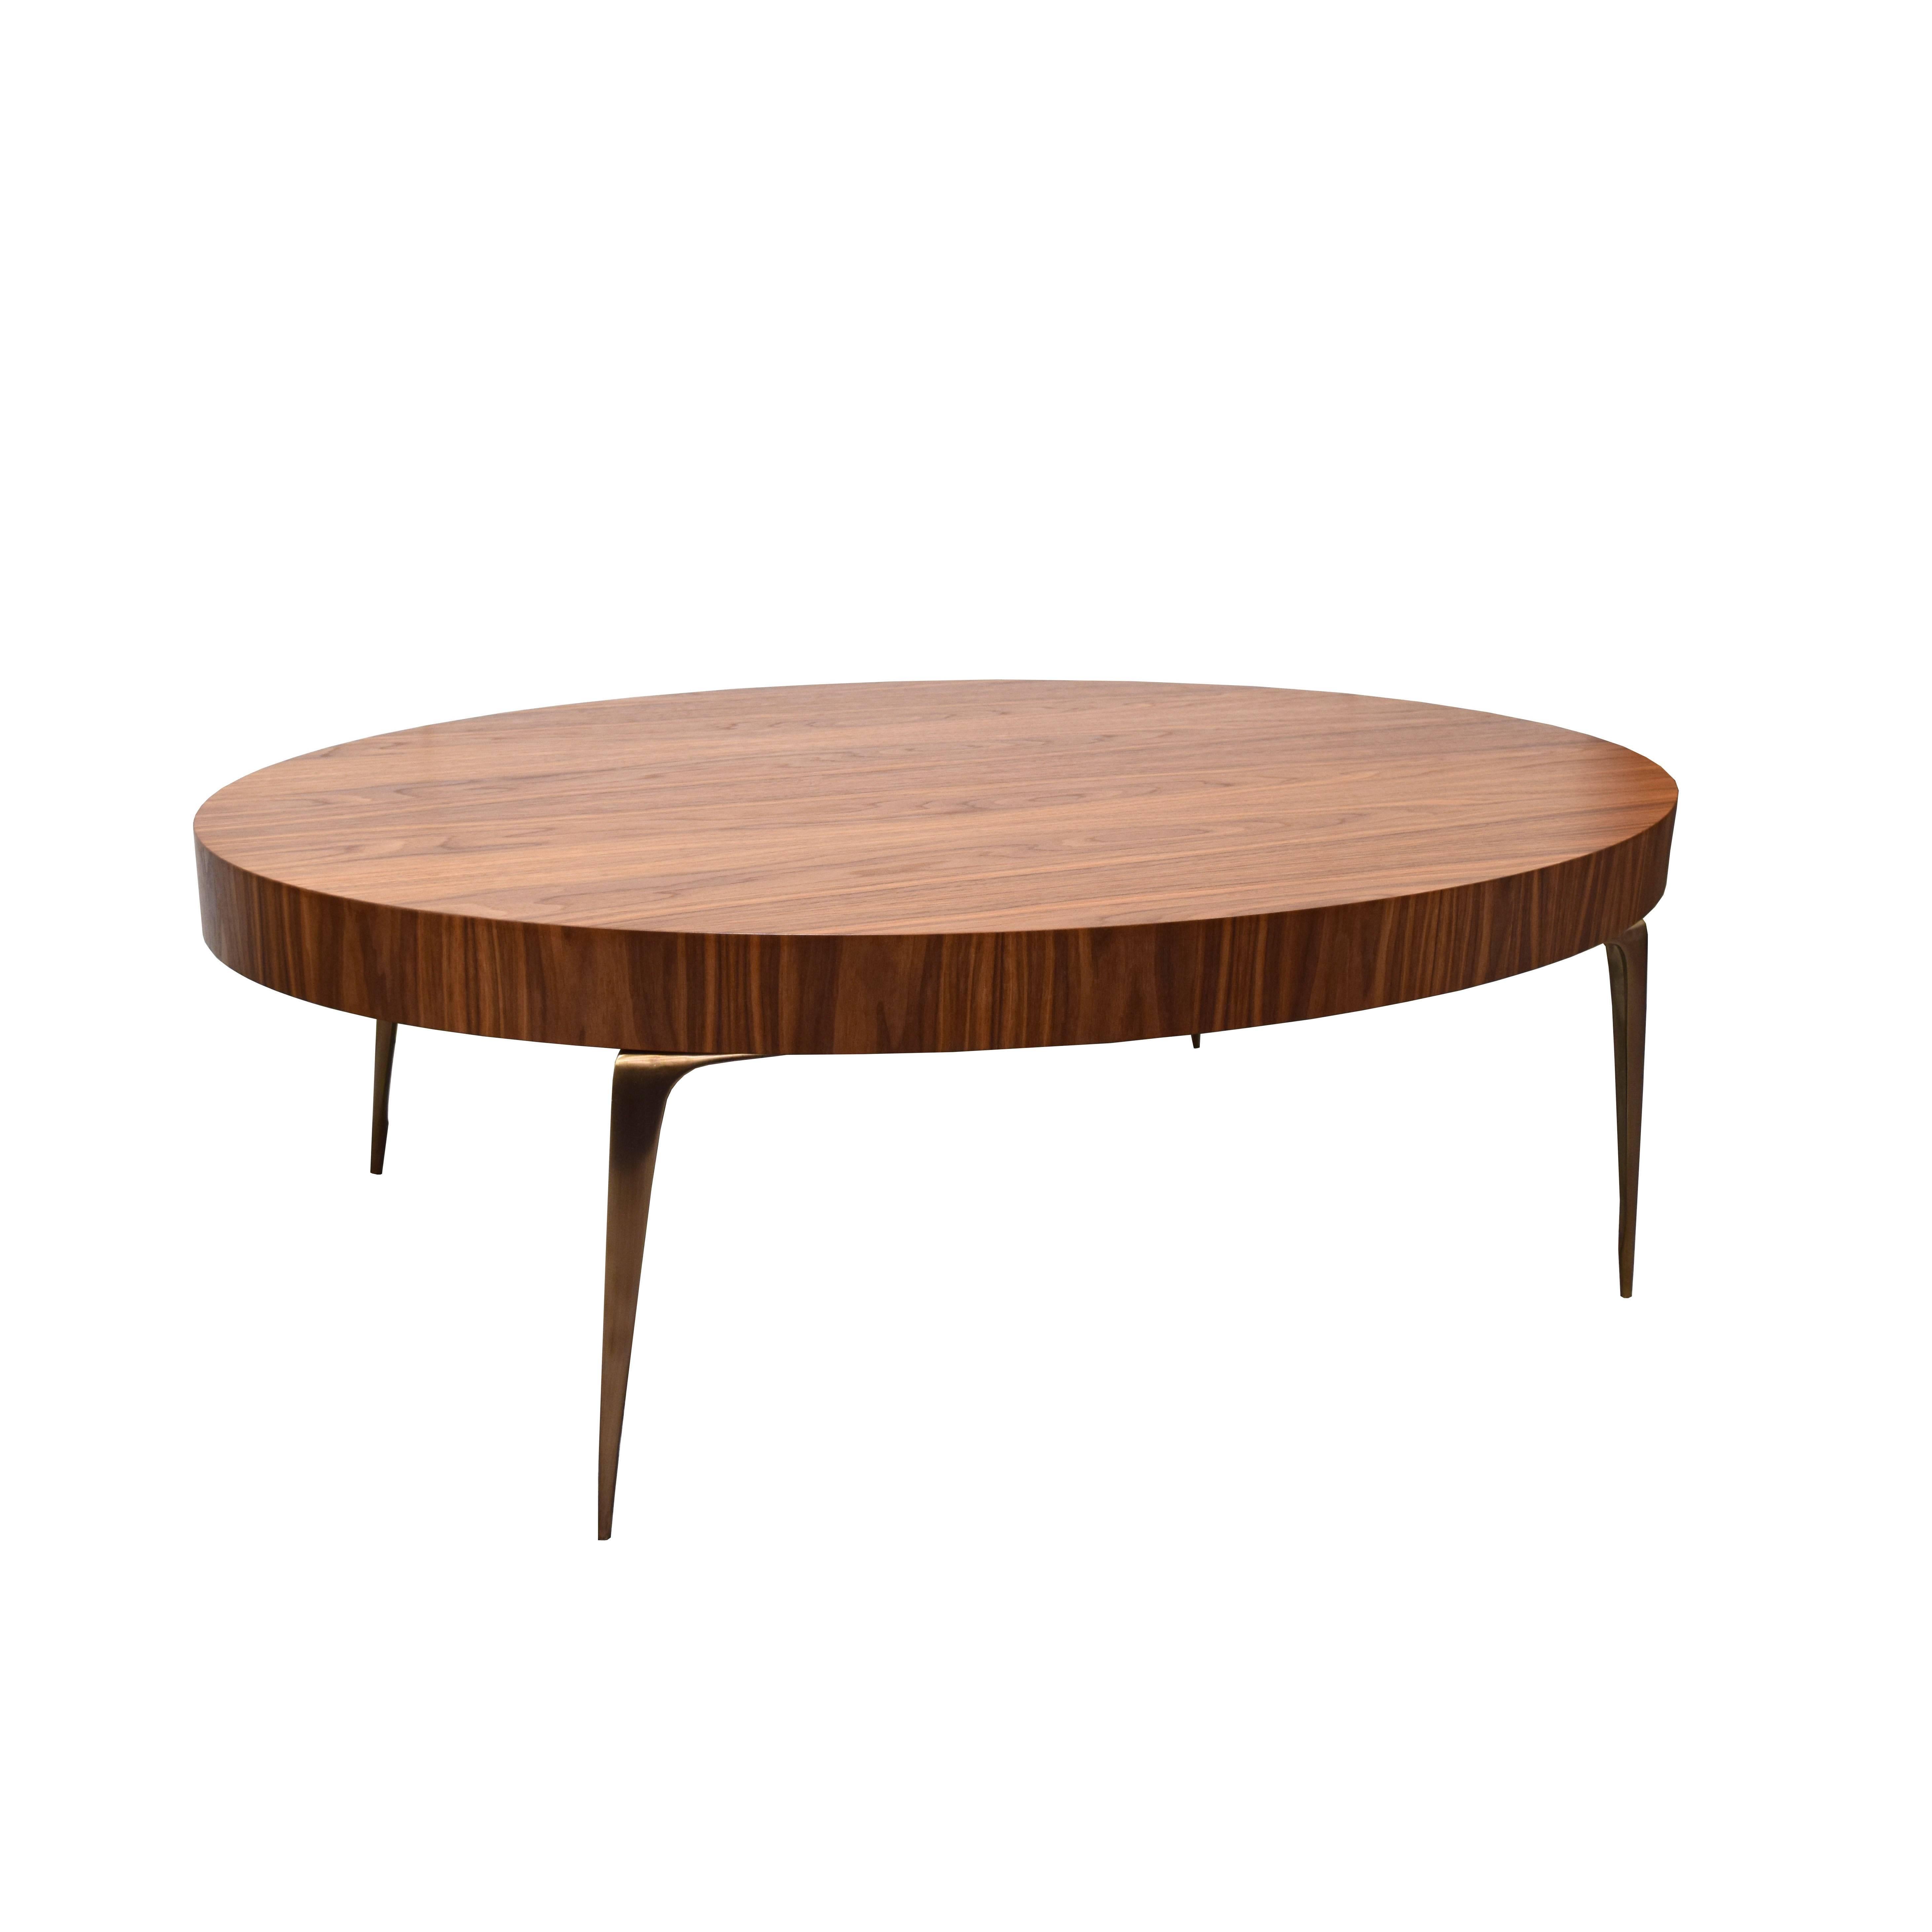 The Oval Stiletto Coffee Table by Irwin Feld for CF MODERN is strikingly simple in natural walnut. The gorgeous wood grain is paired with four antiqued brass stiletto legs and and will stand out as a conversation piece in a living space or hall.